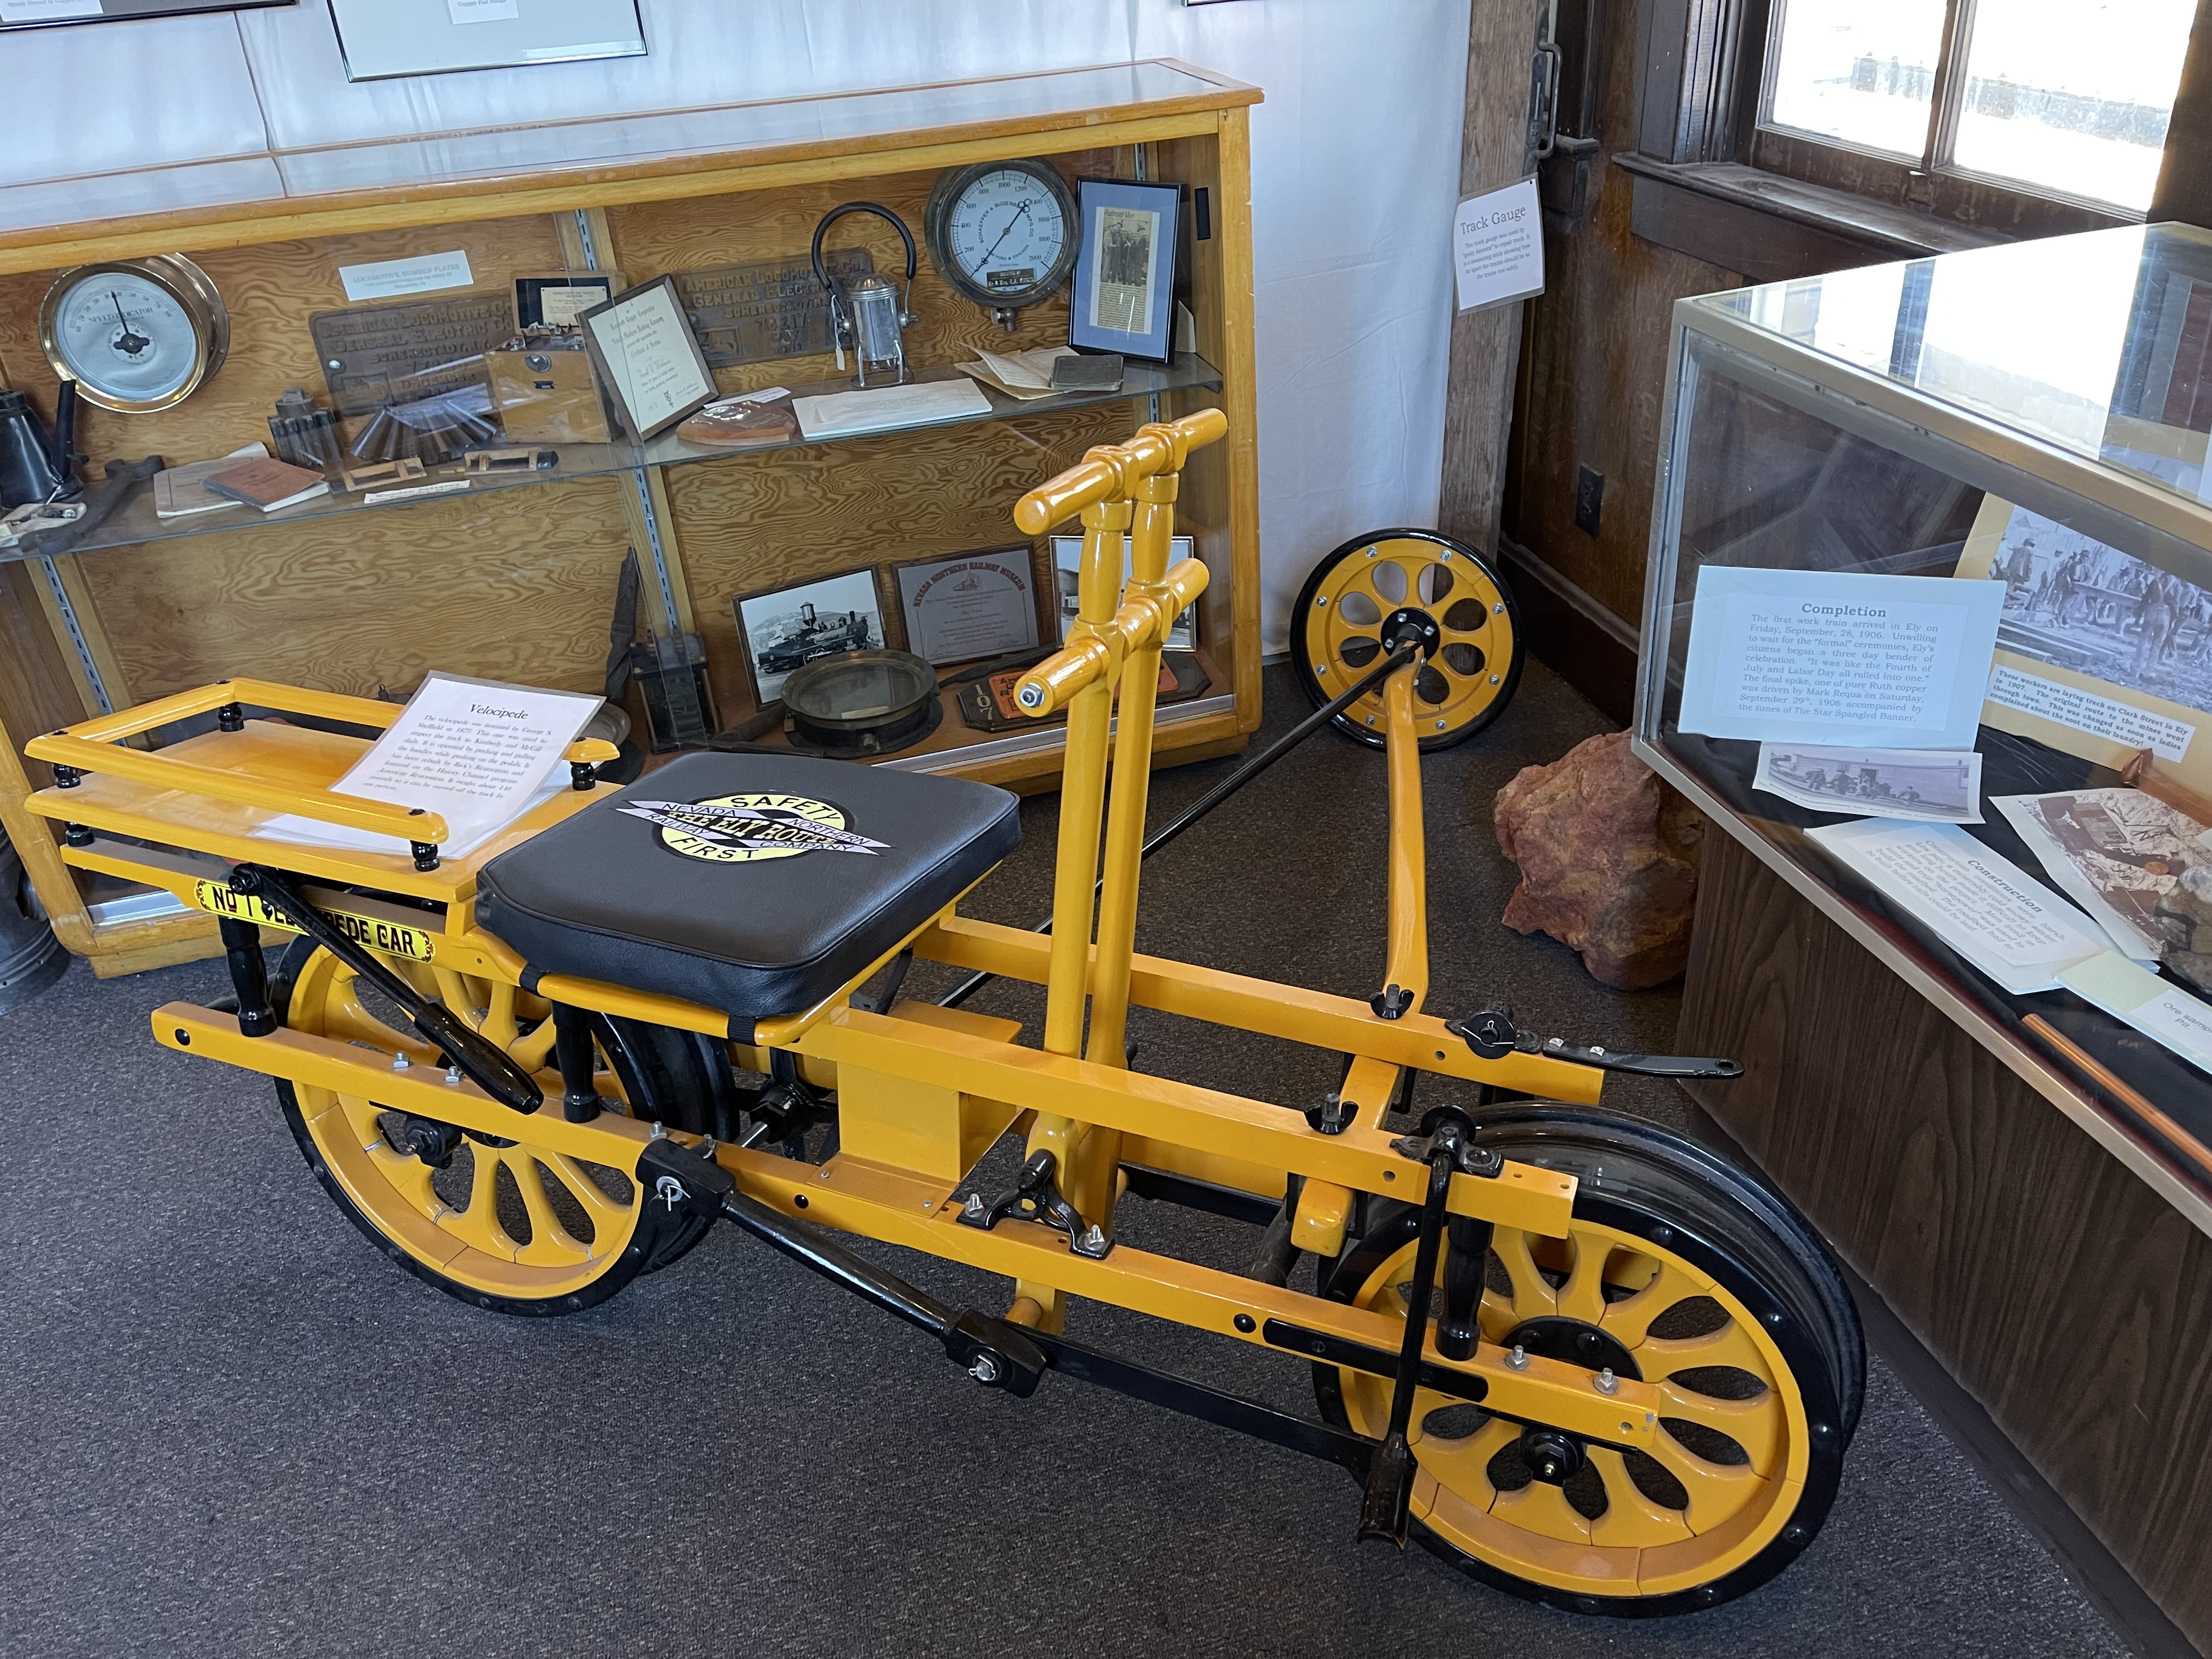 with a black leather seat and brilliant yellow frame and wheels, the cart sits on the museum floor, with the third wheel extending for balance on the second rail.  Power is supplied by a hand bar.